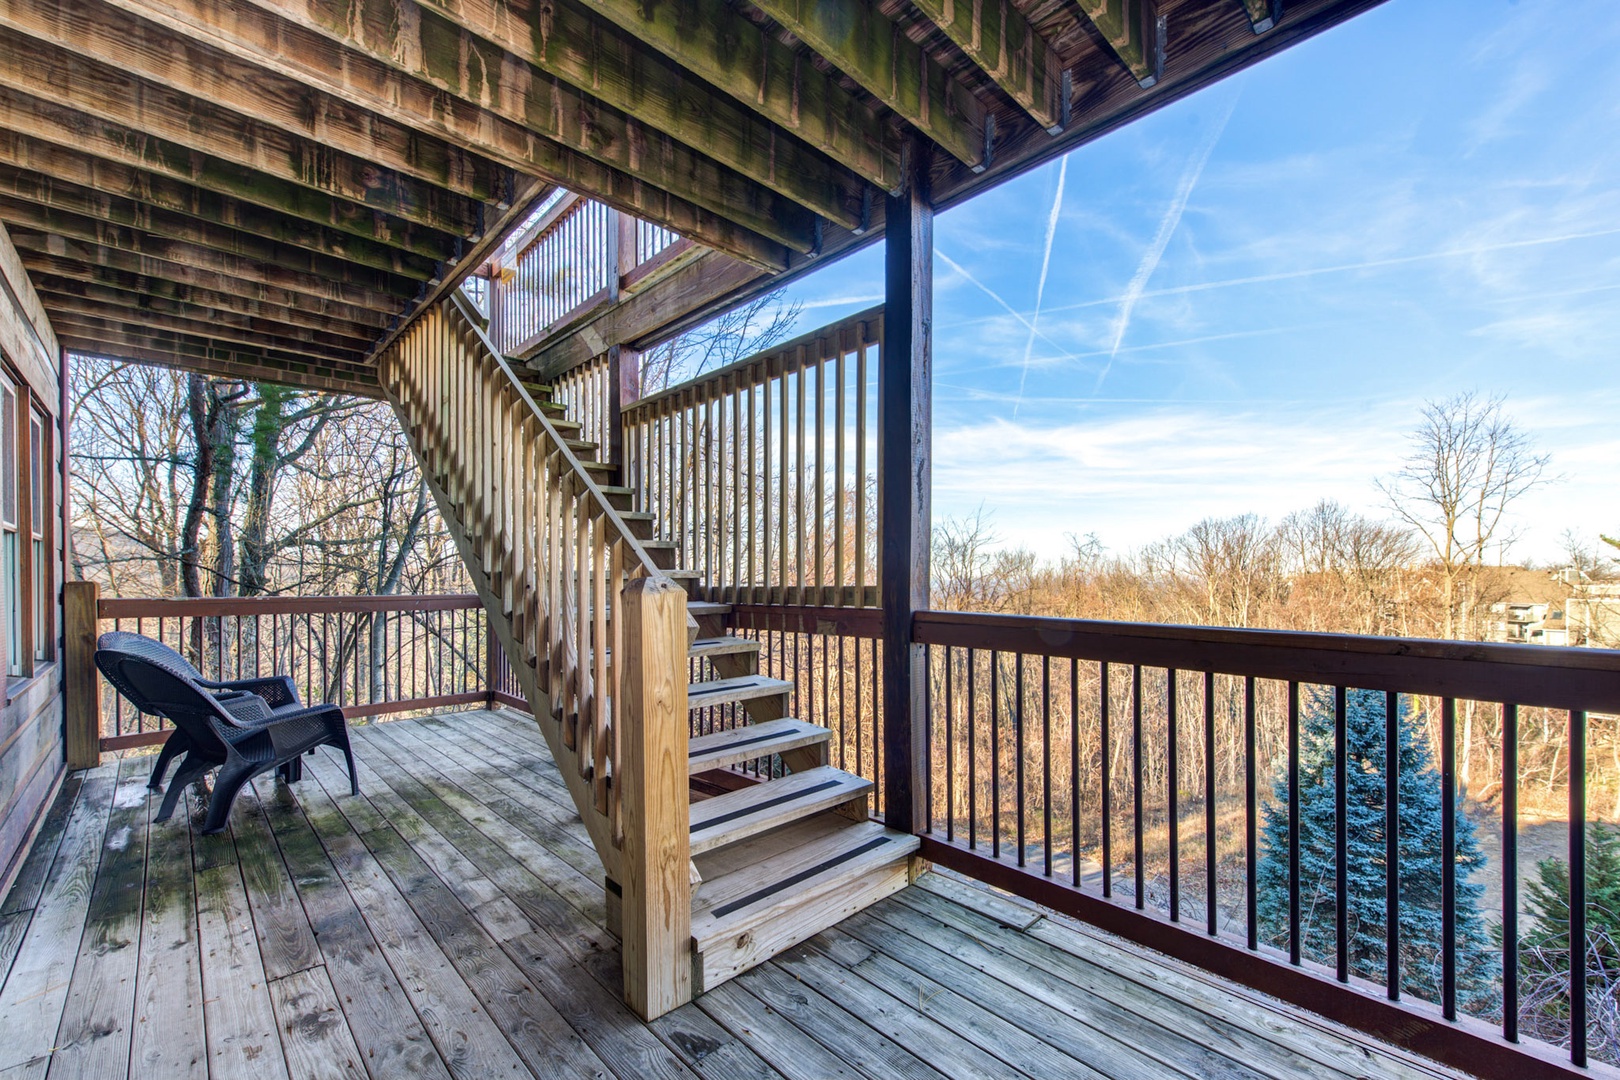 The back deck offers different levels, each ideal for taking in the view!